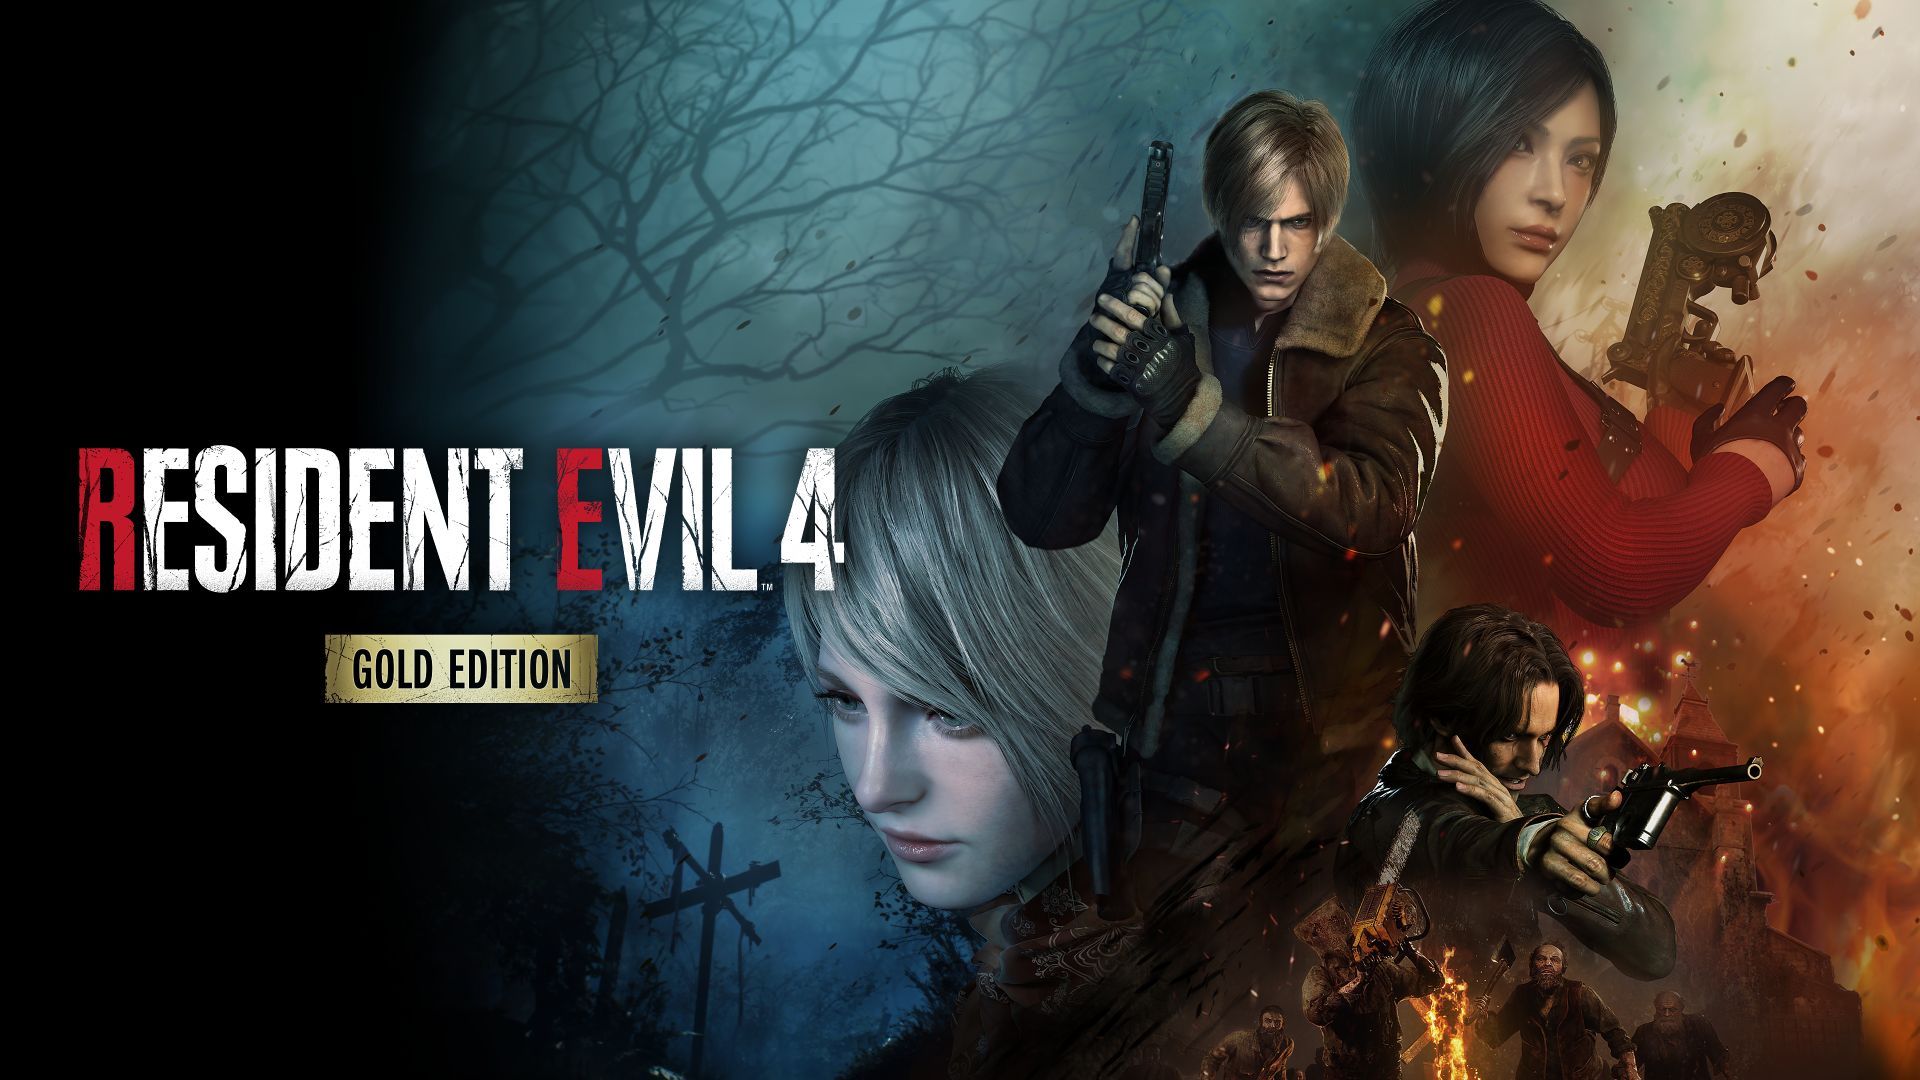 Resident Evil 4 Gold Edition is Out Now